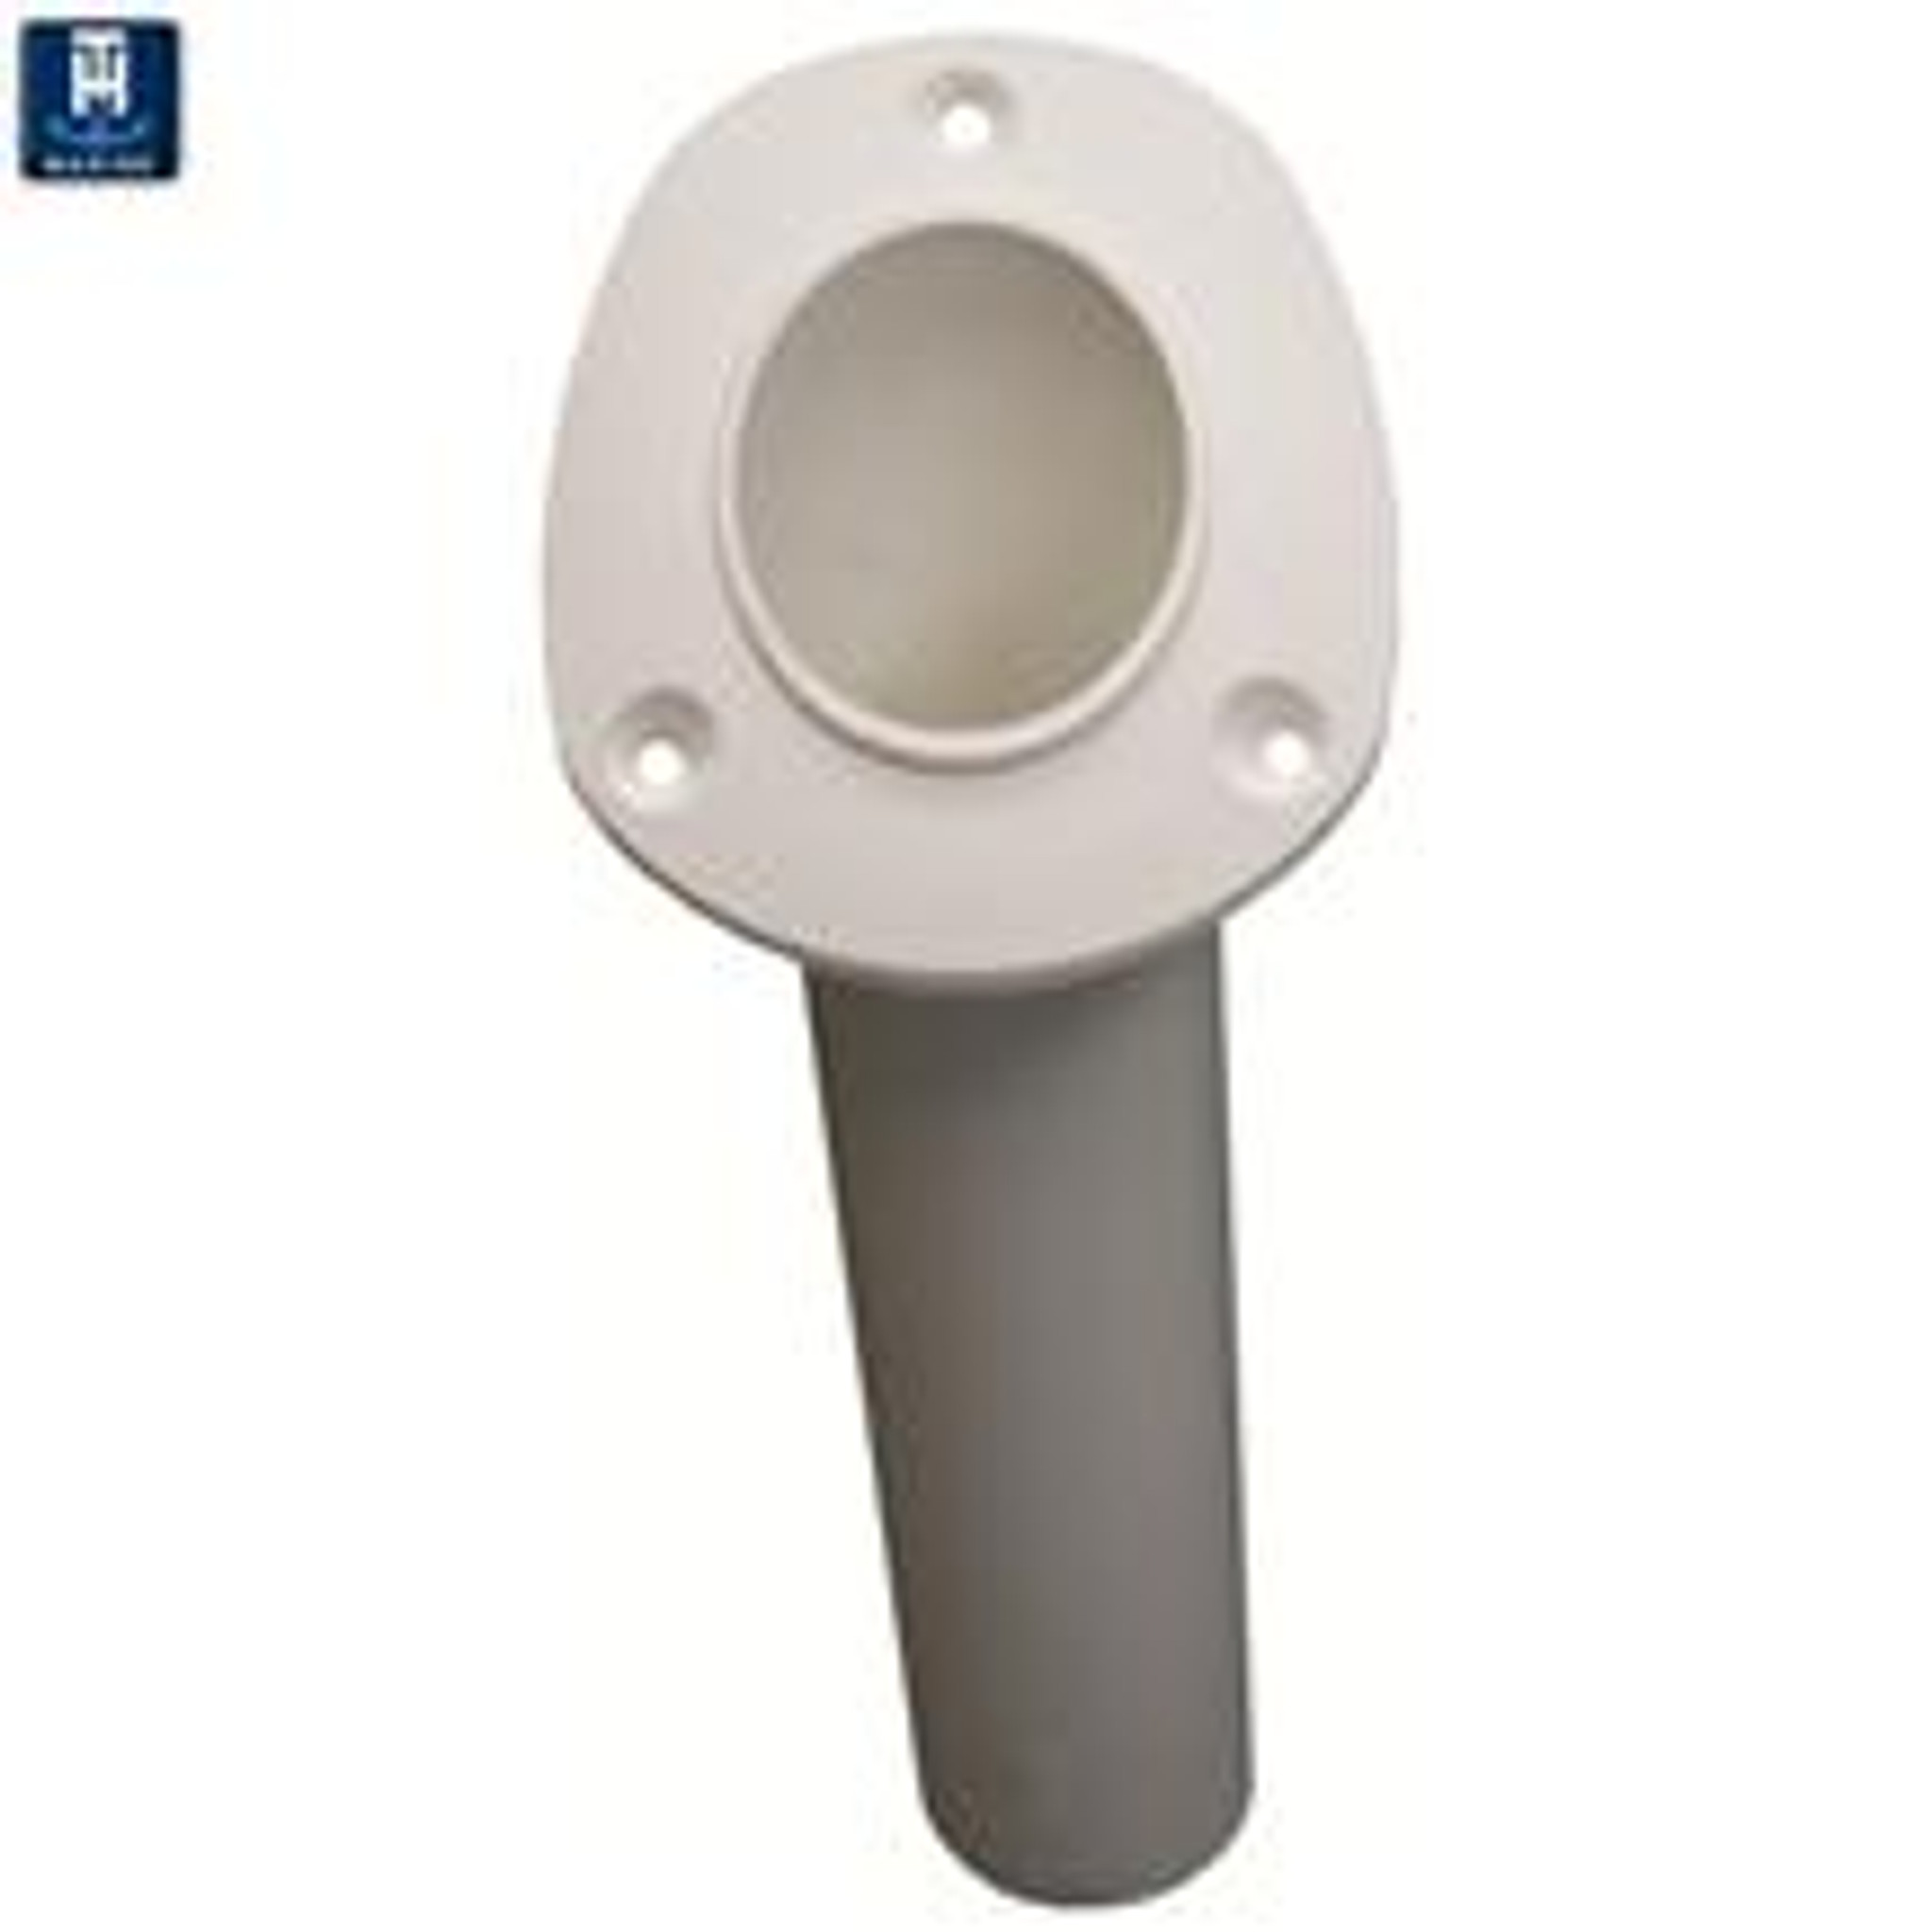 Plastic Rod Holder Caps Suits Oval Head 49220 - White (49230) - Online  Boating Store - Boat Parts